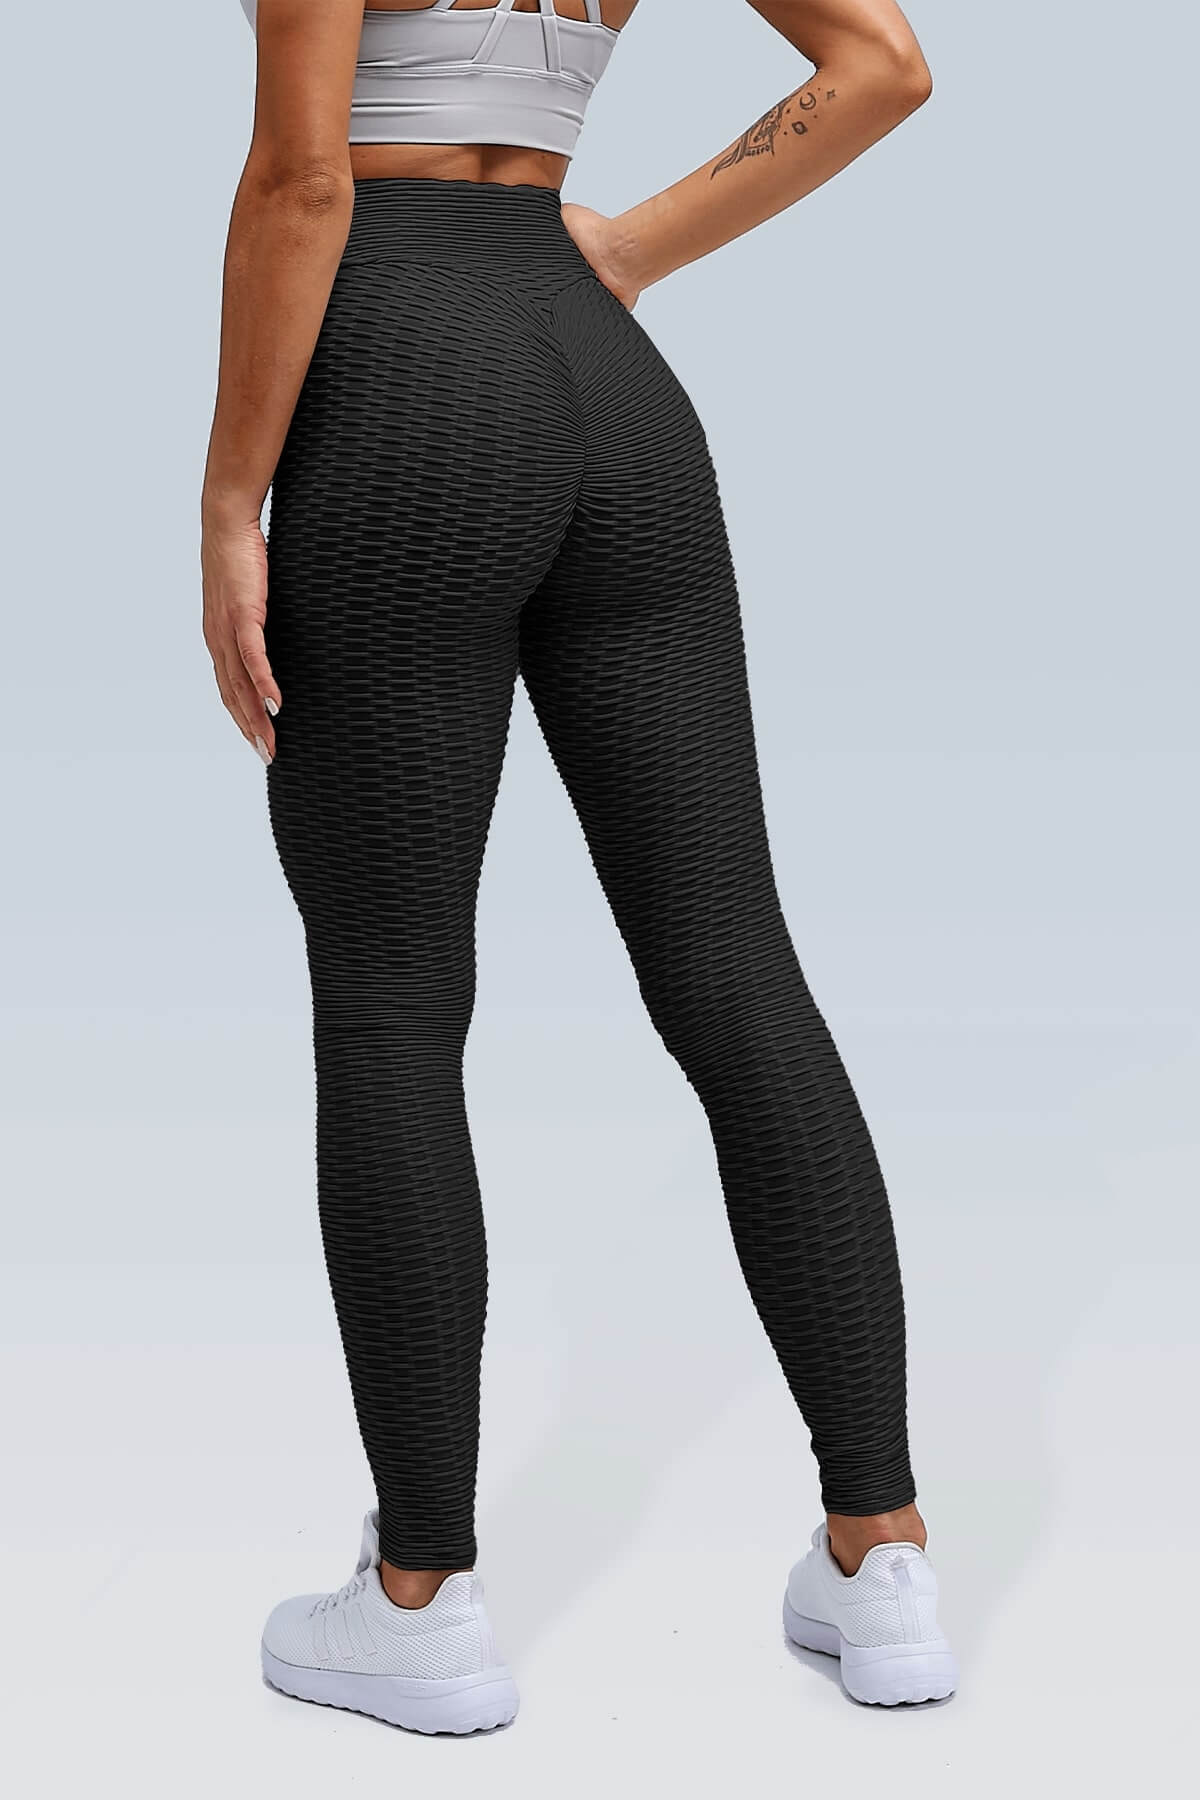 Two Way Crinkle Leggings With Scrunch Bum or Waist / Ultra Body